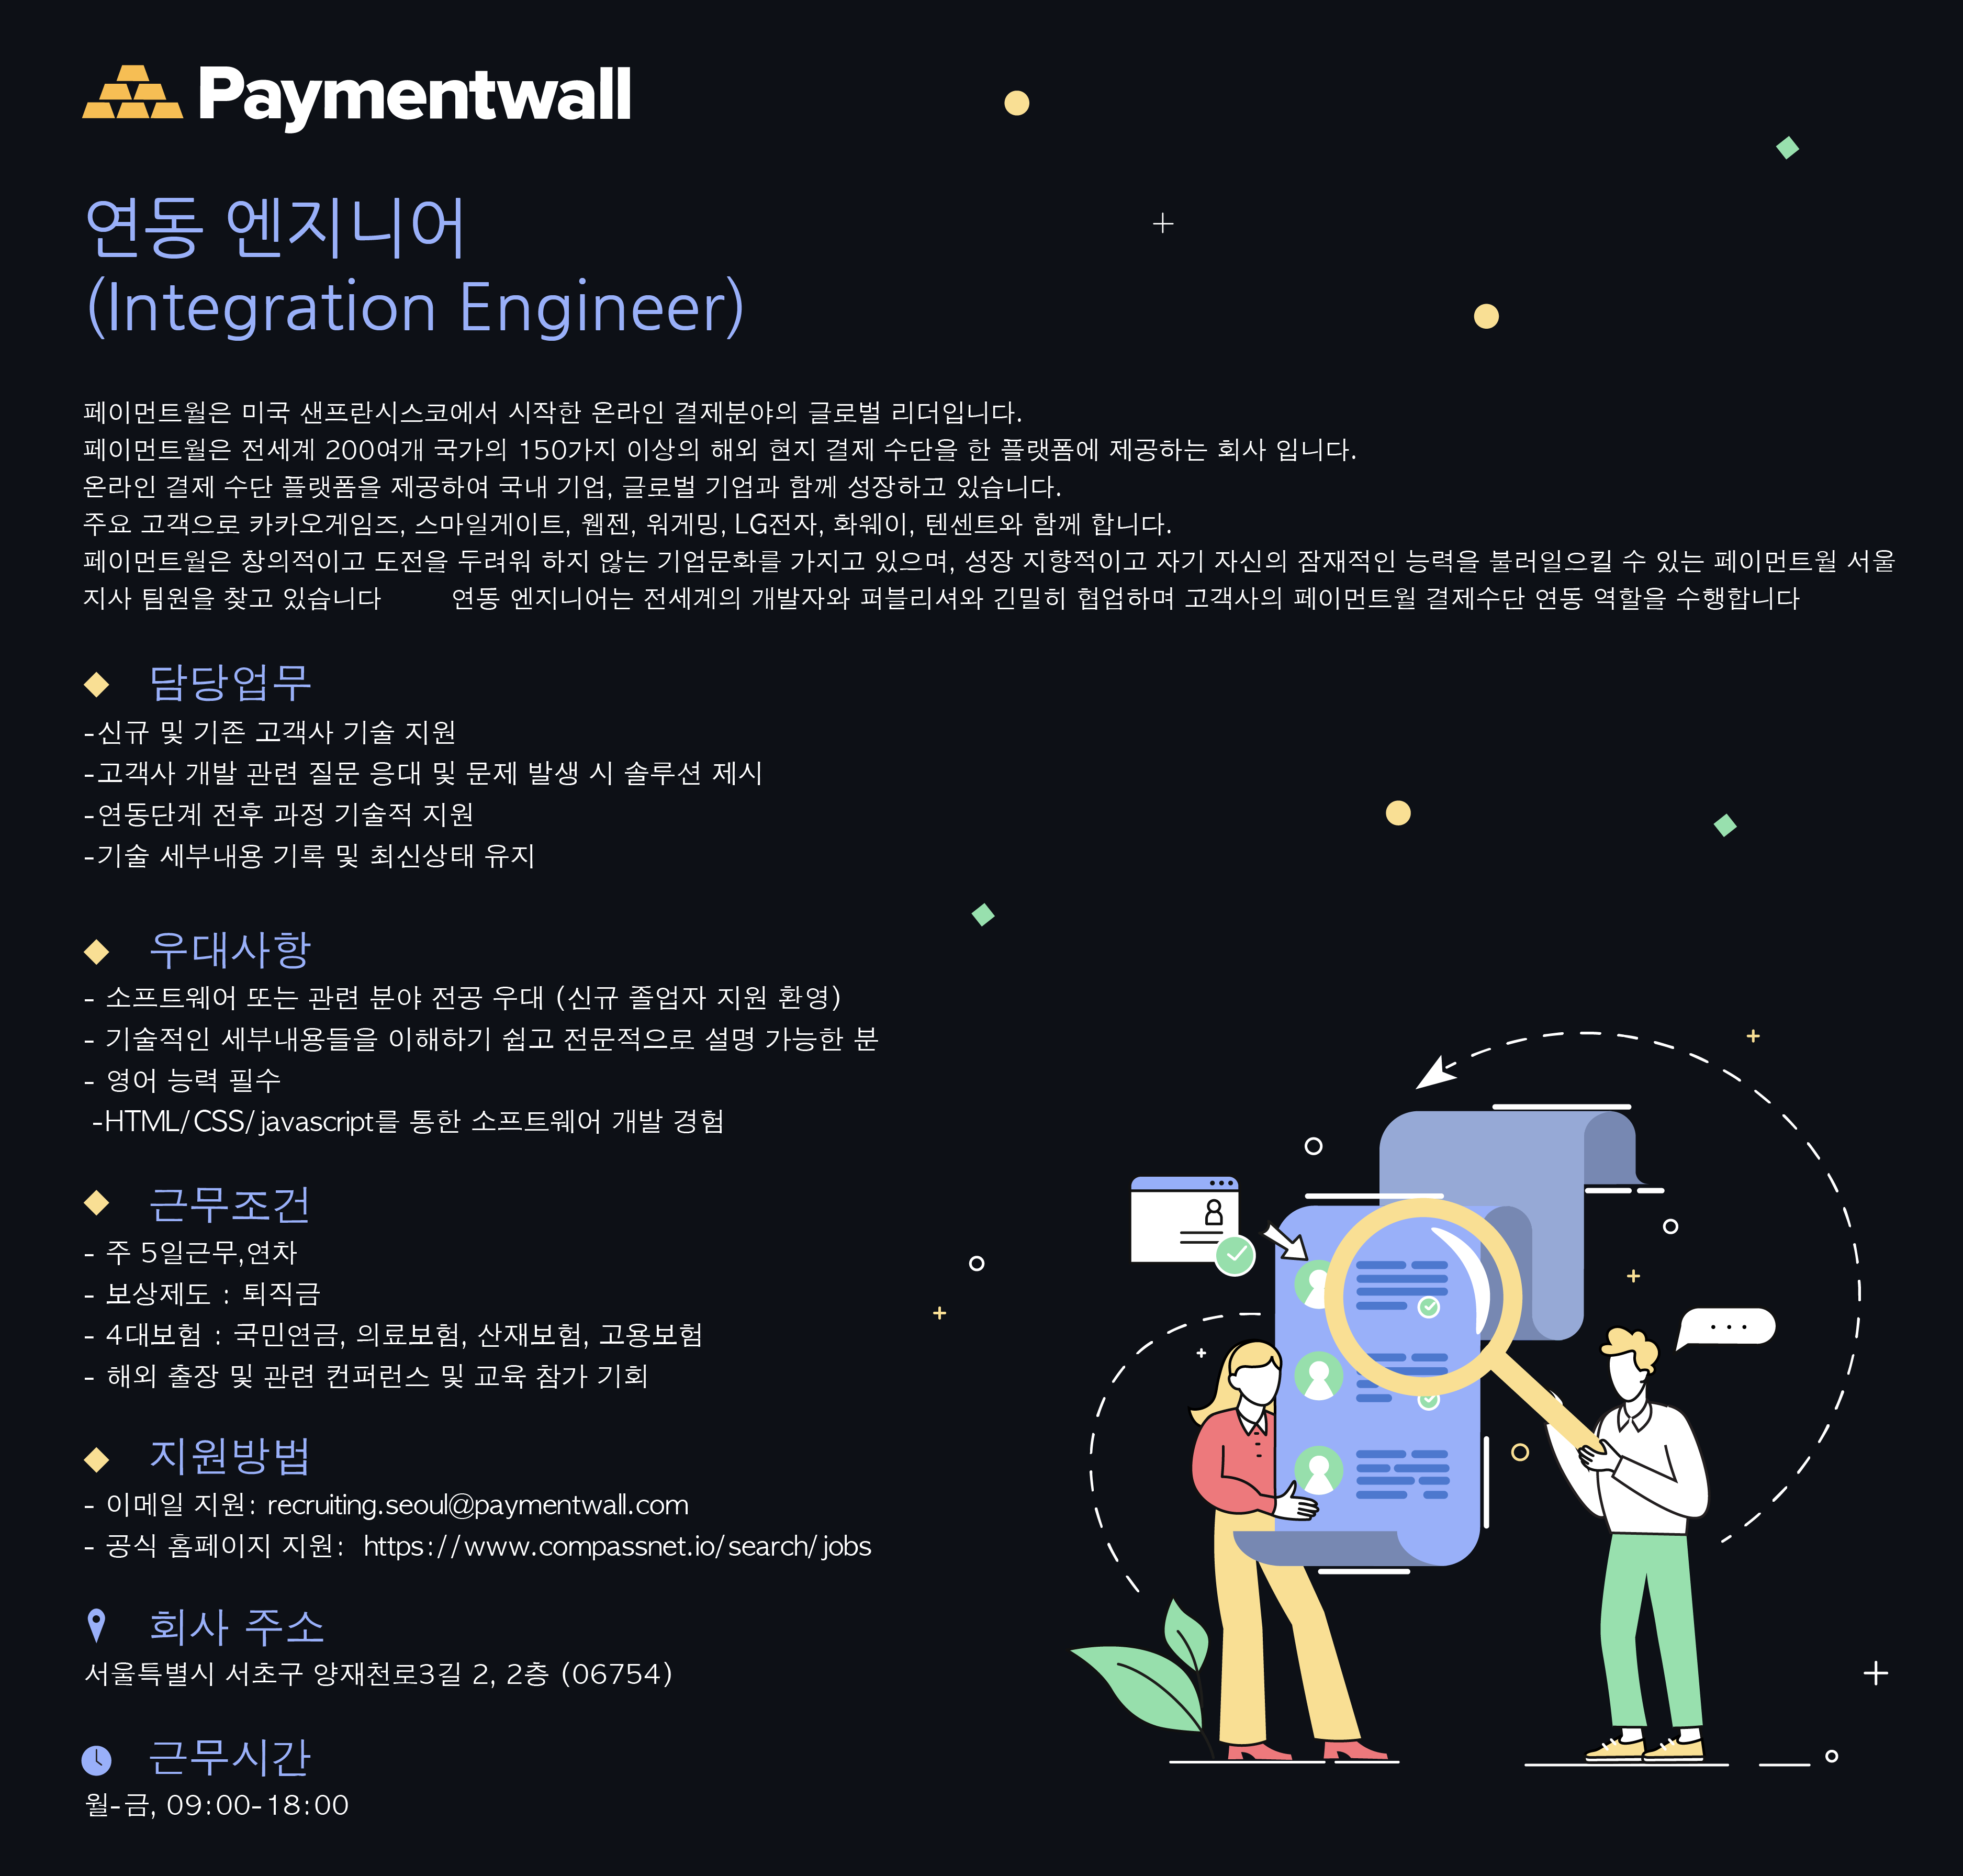 Paymentwall Seoul